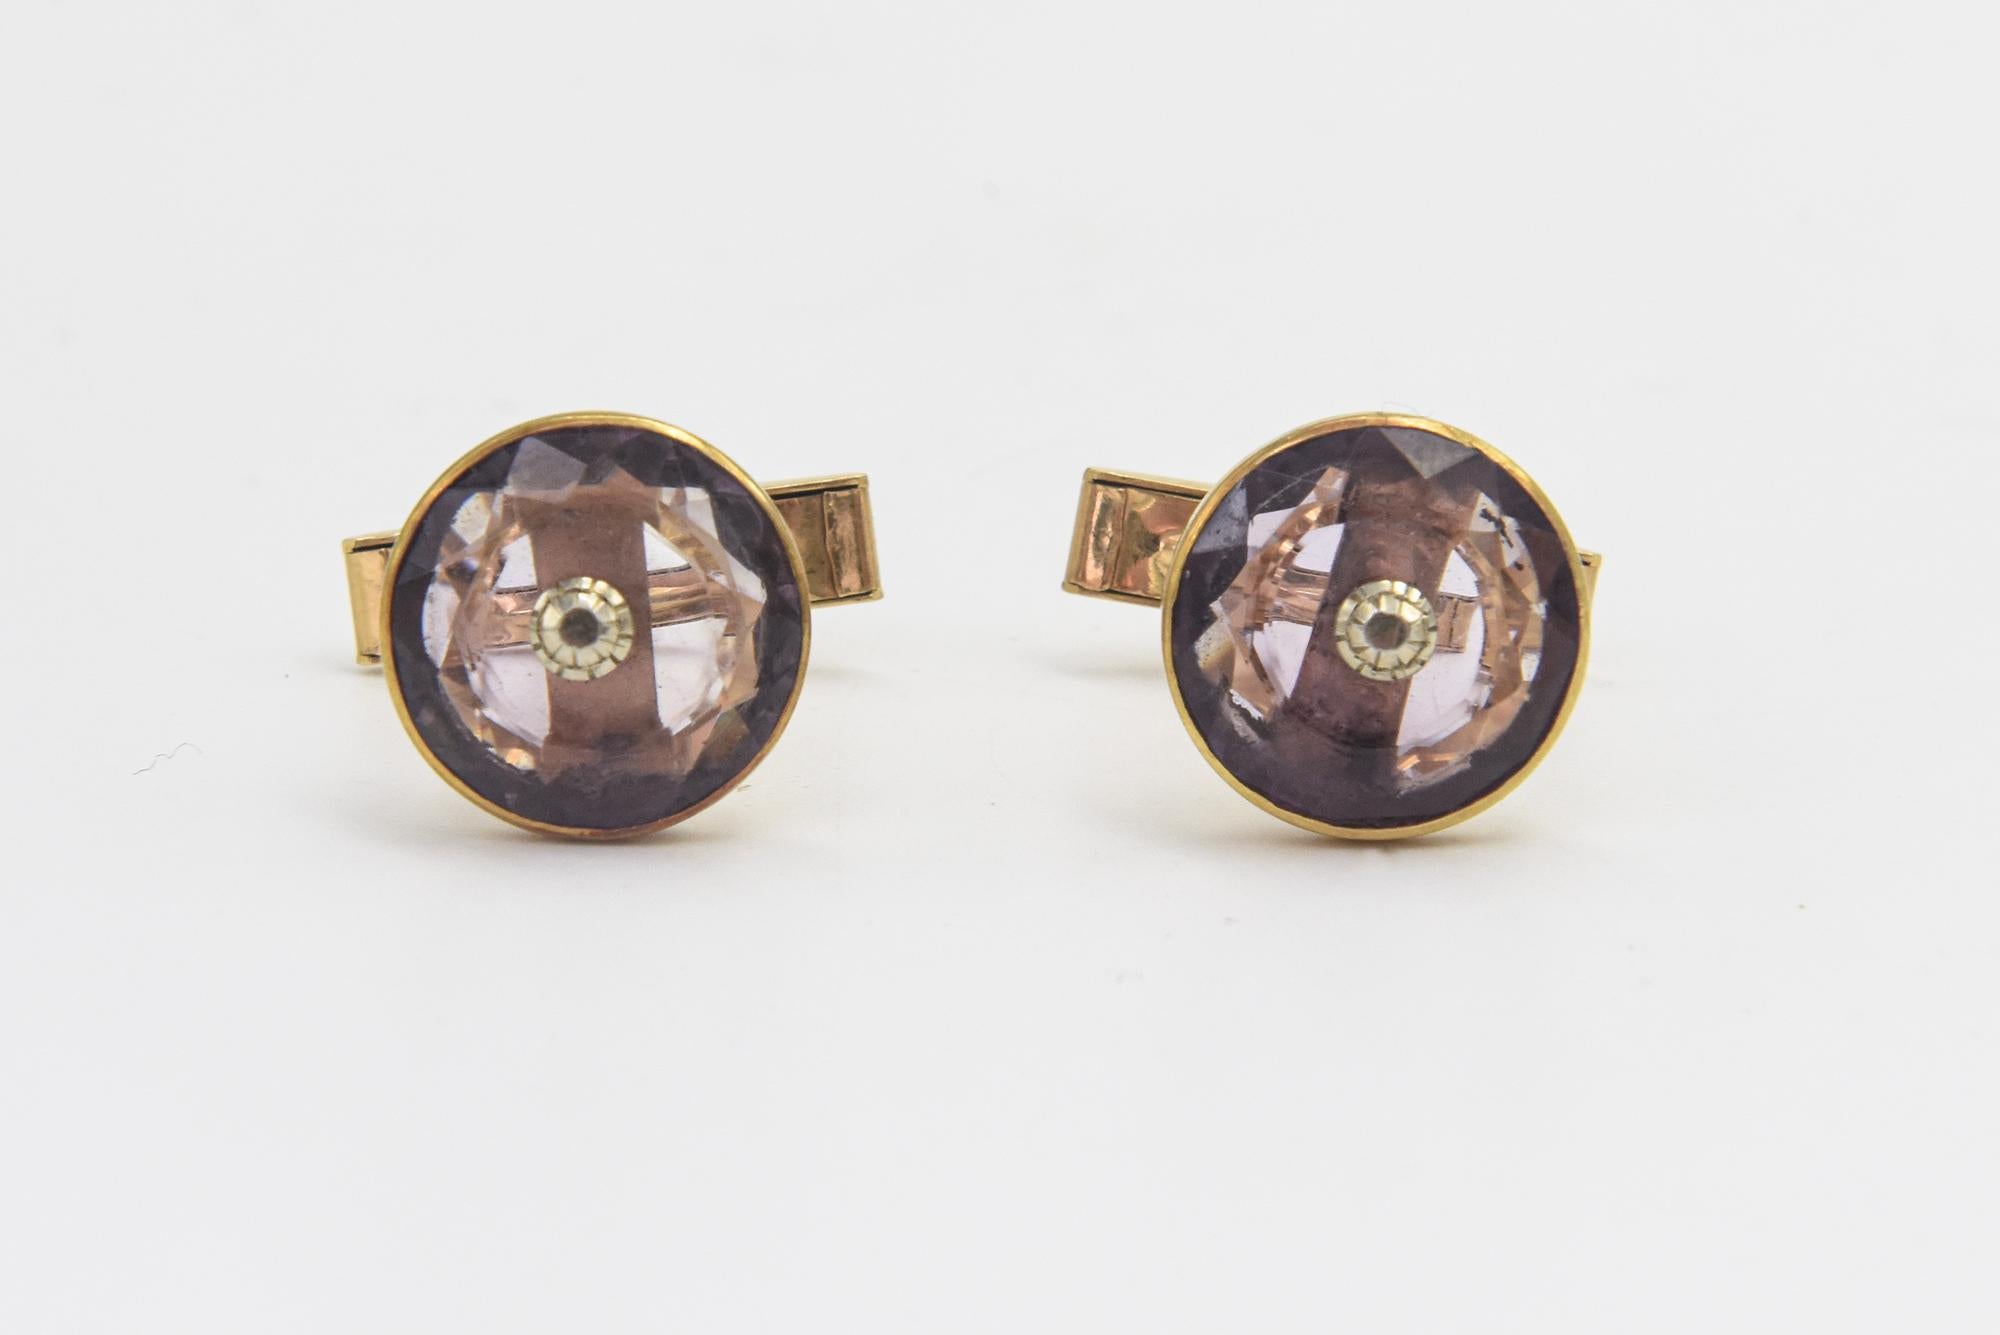 Antique arts and crafts faceted amethyst round 14k yellow gold cufflinks that have a later add 